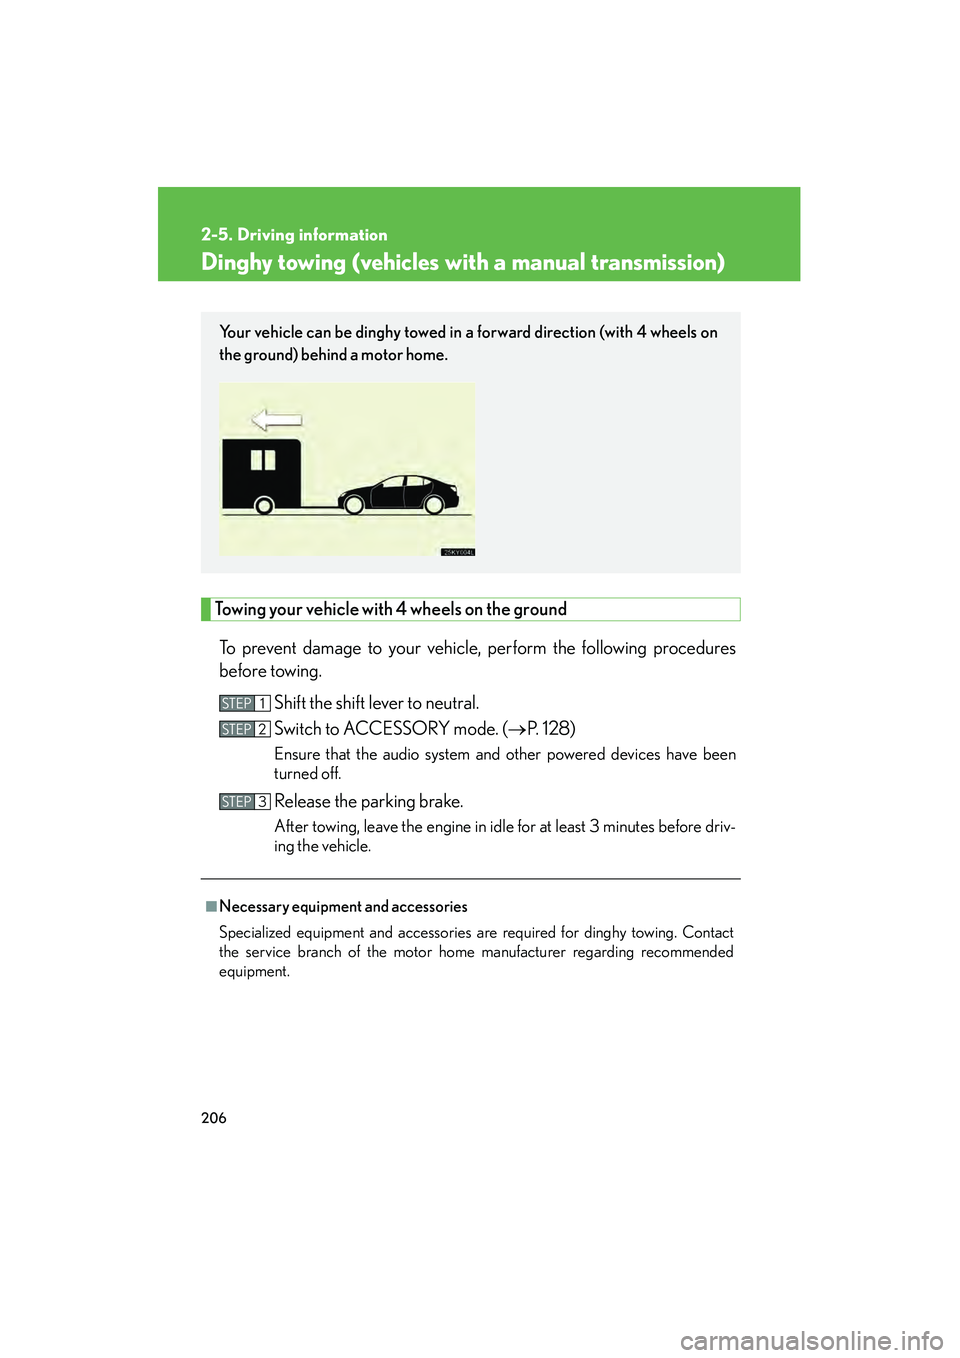 Lexus IS250 2009  Owners Manual 206
2-5. Driving information
08_IS350/250_U_(L/O_0808)
Dinghy towing (vehicles with a manual transmission)
Towing your vehicle with 4 wheels on the groundTo prevent damage to your vehicle, perform the